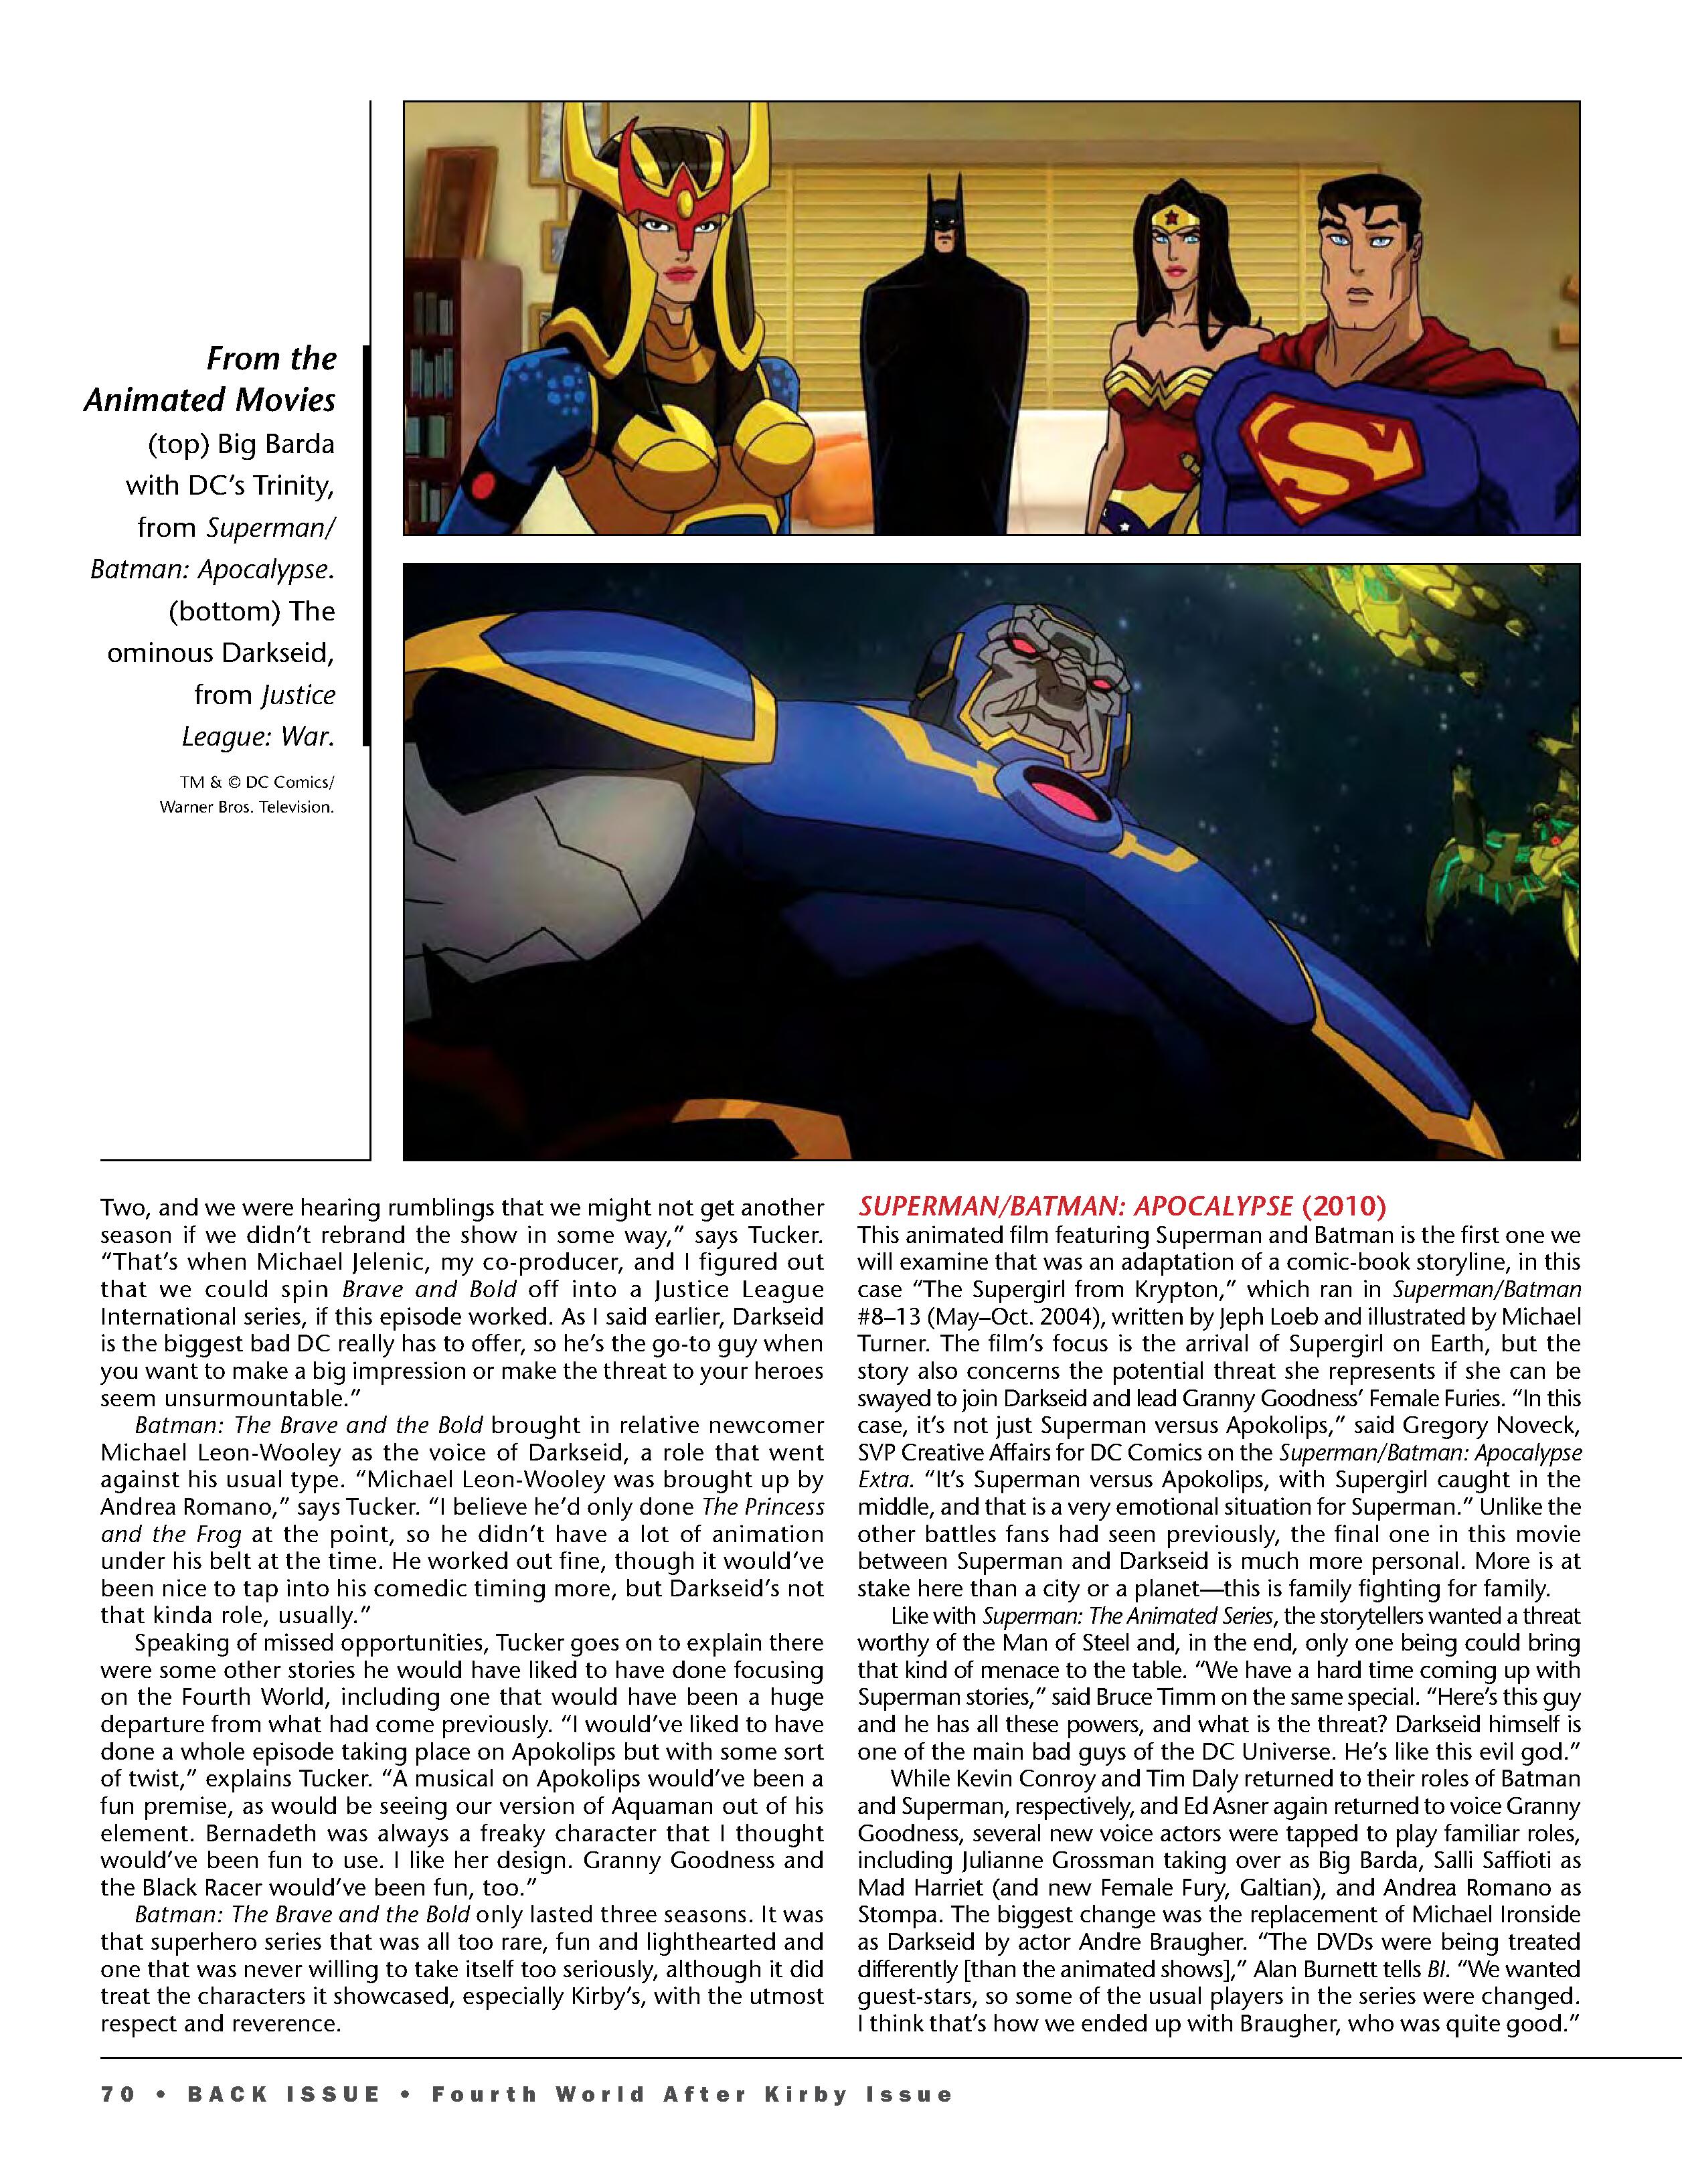 Read online Back Issue comic -  Issue #104 - 72